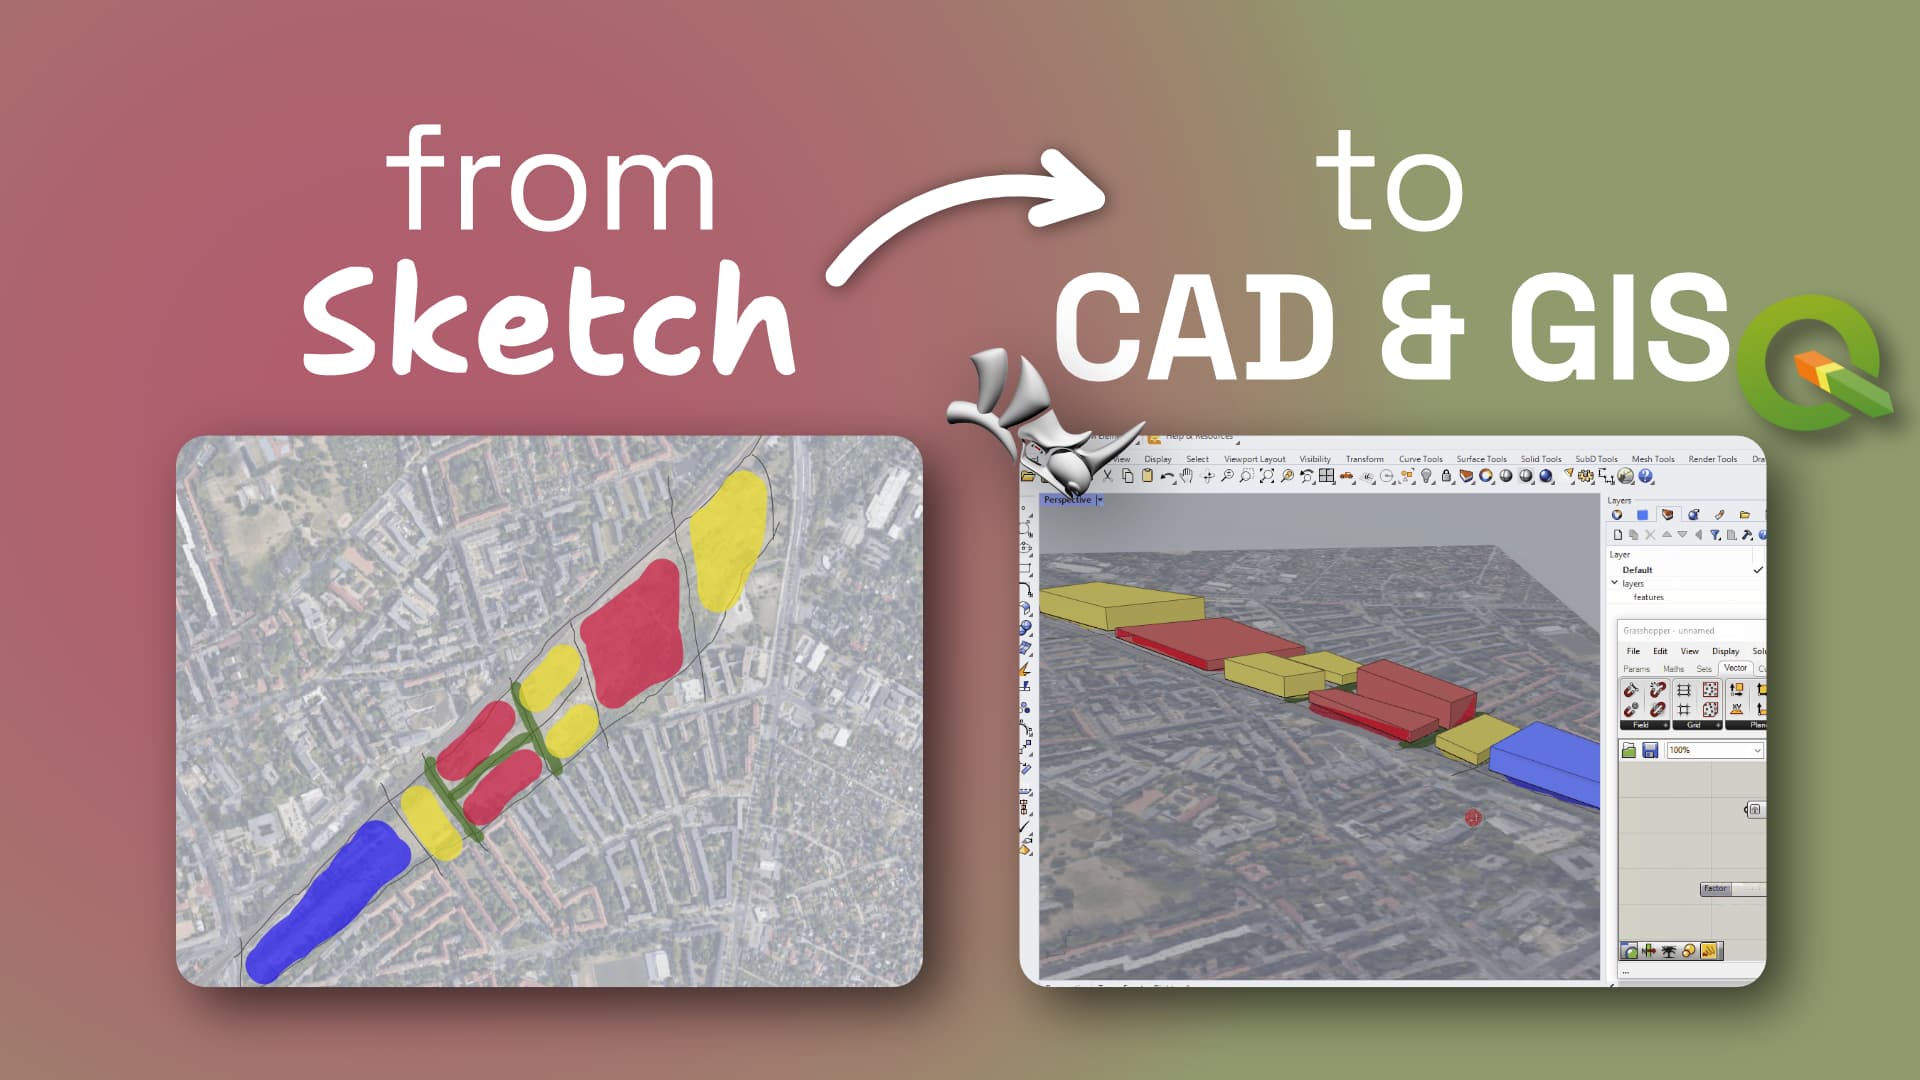 Turn Your Sketch Into a GIS or CAD Base Map